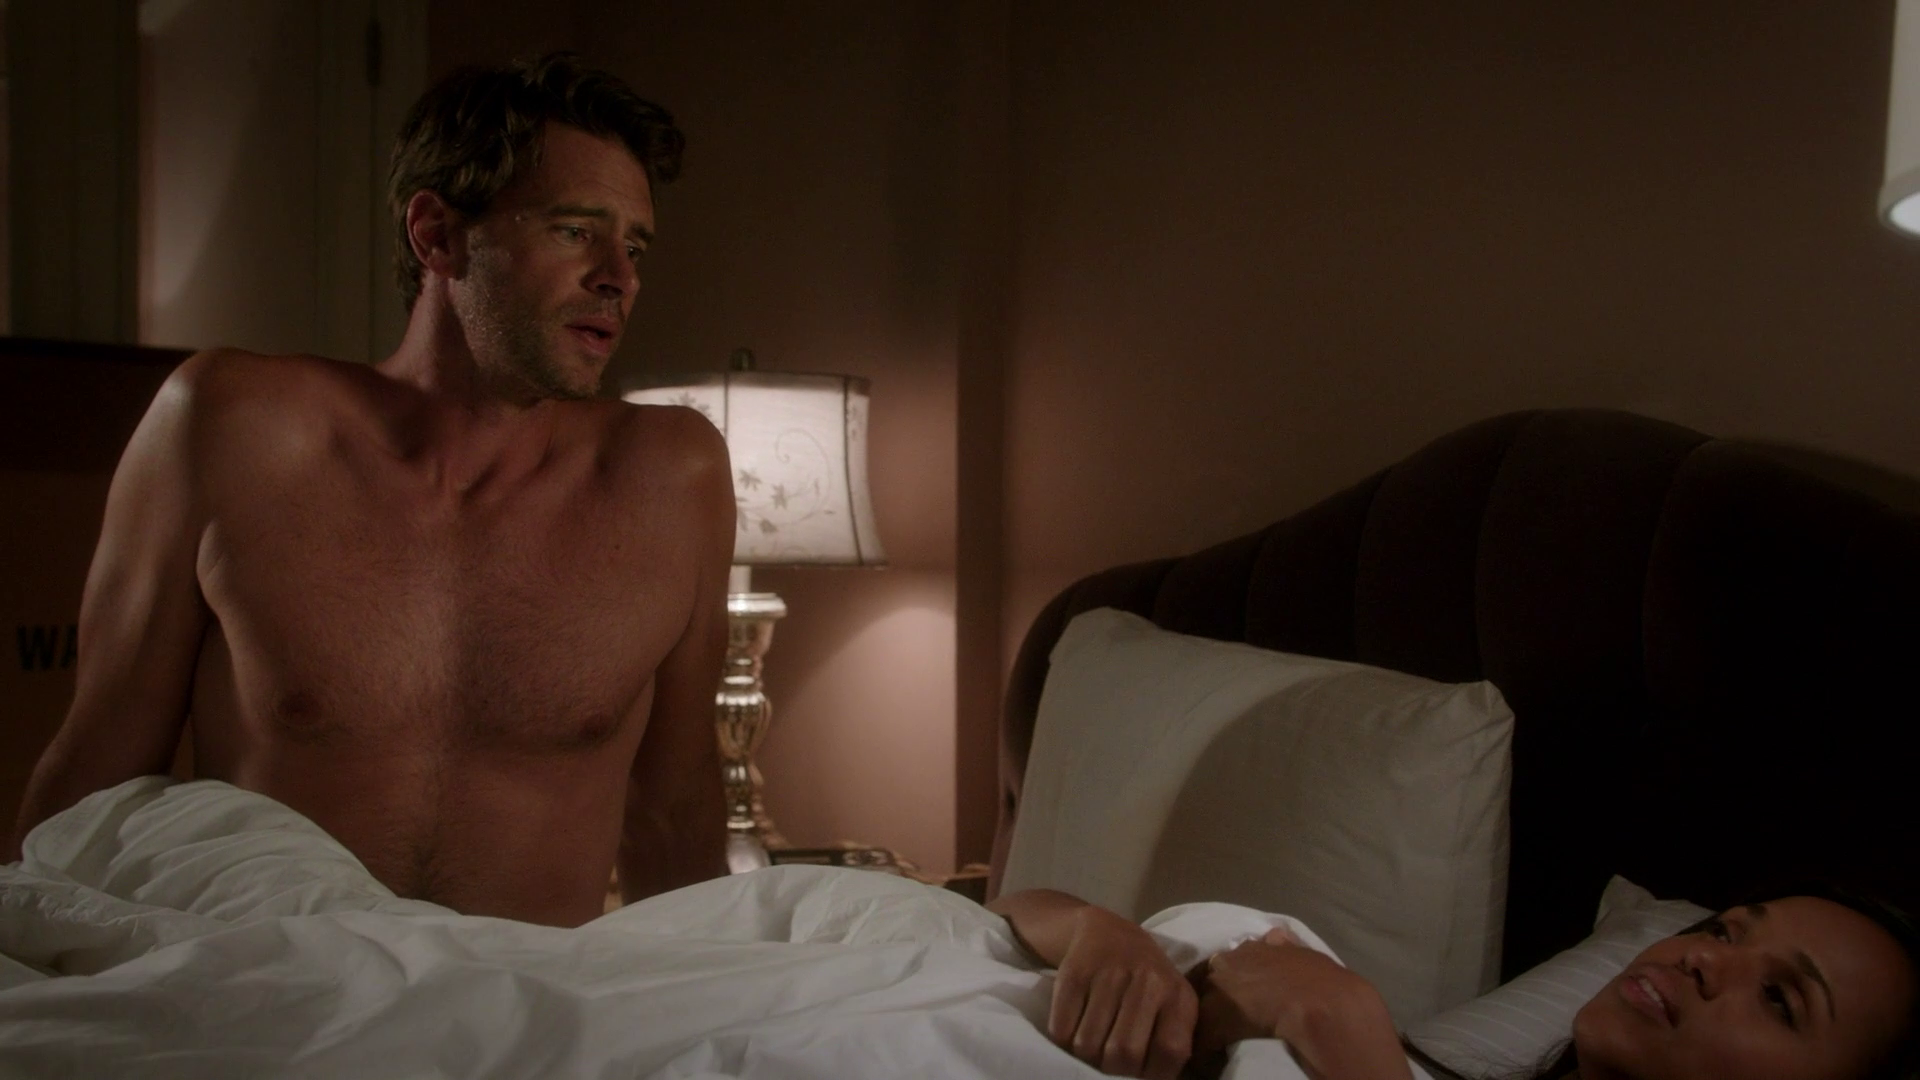 Scot Foley shirtless in Scandal 4-01 "Randy, Red, Superfreak and Julia...